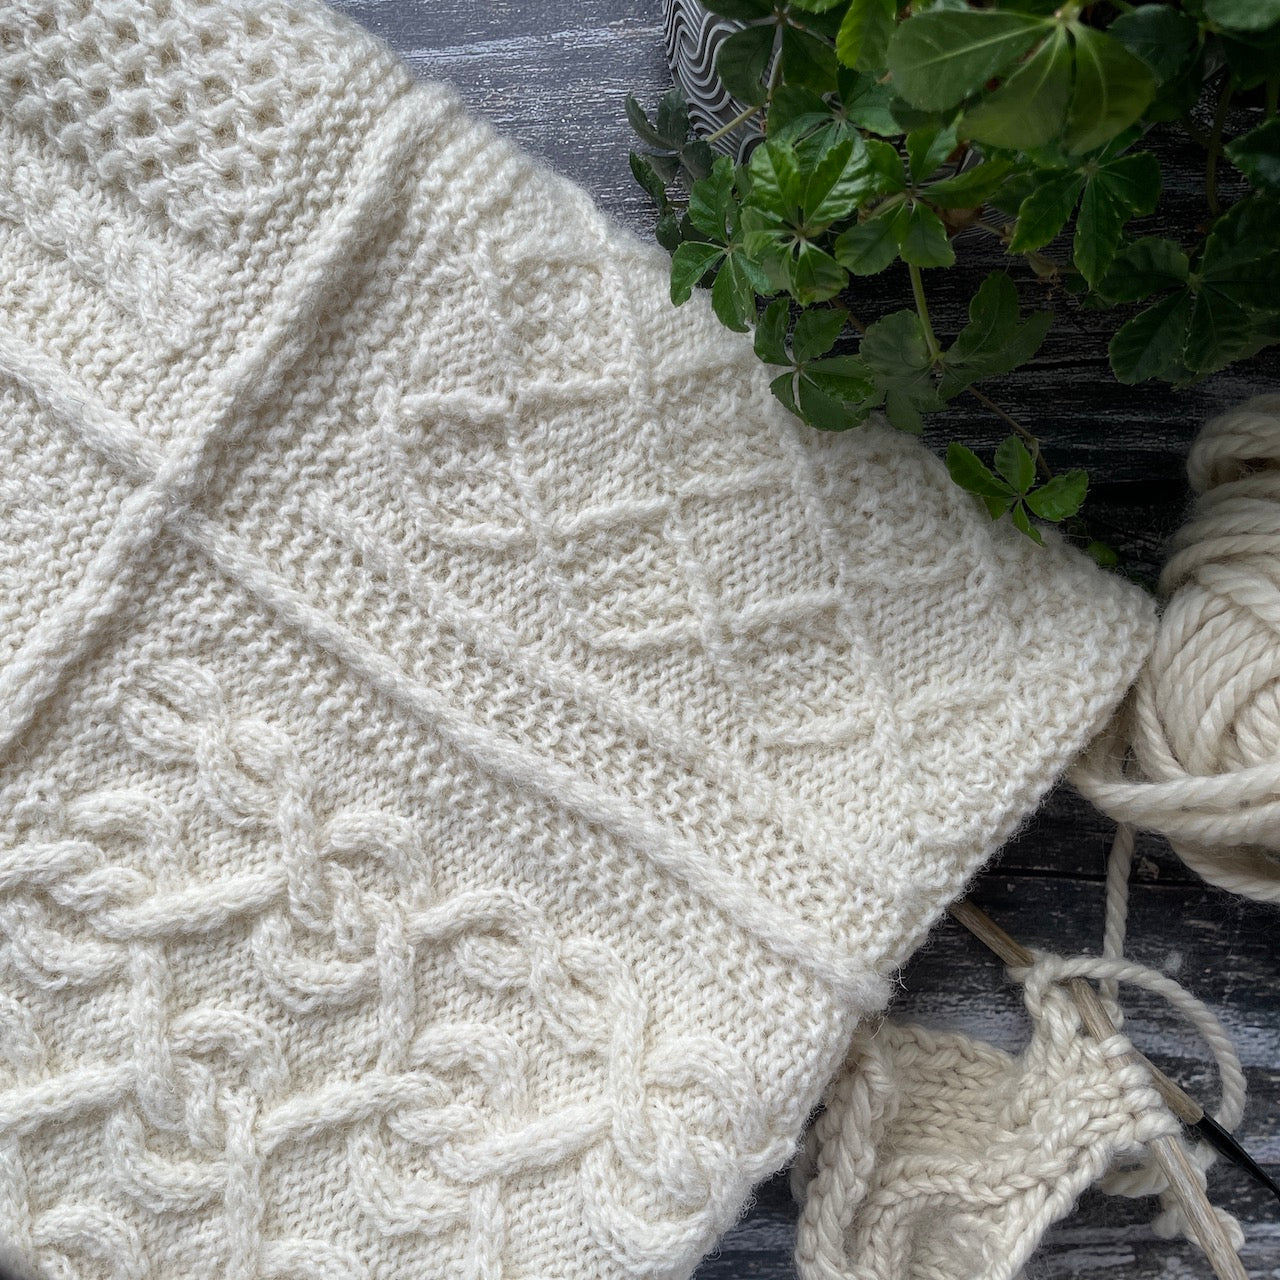 Twisted Cable Crochet Pattern